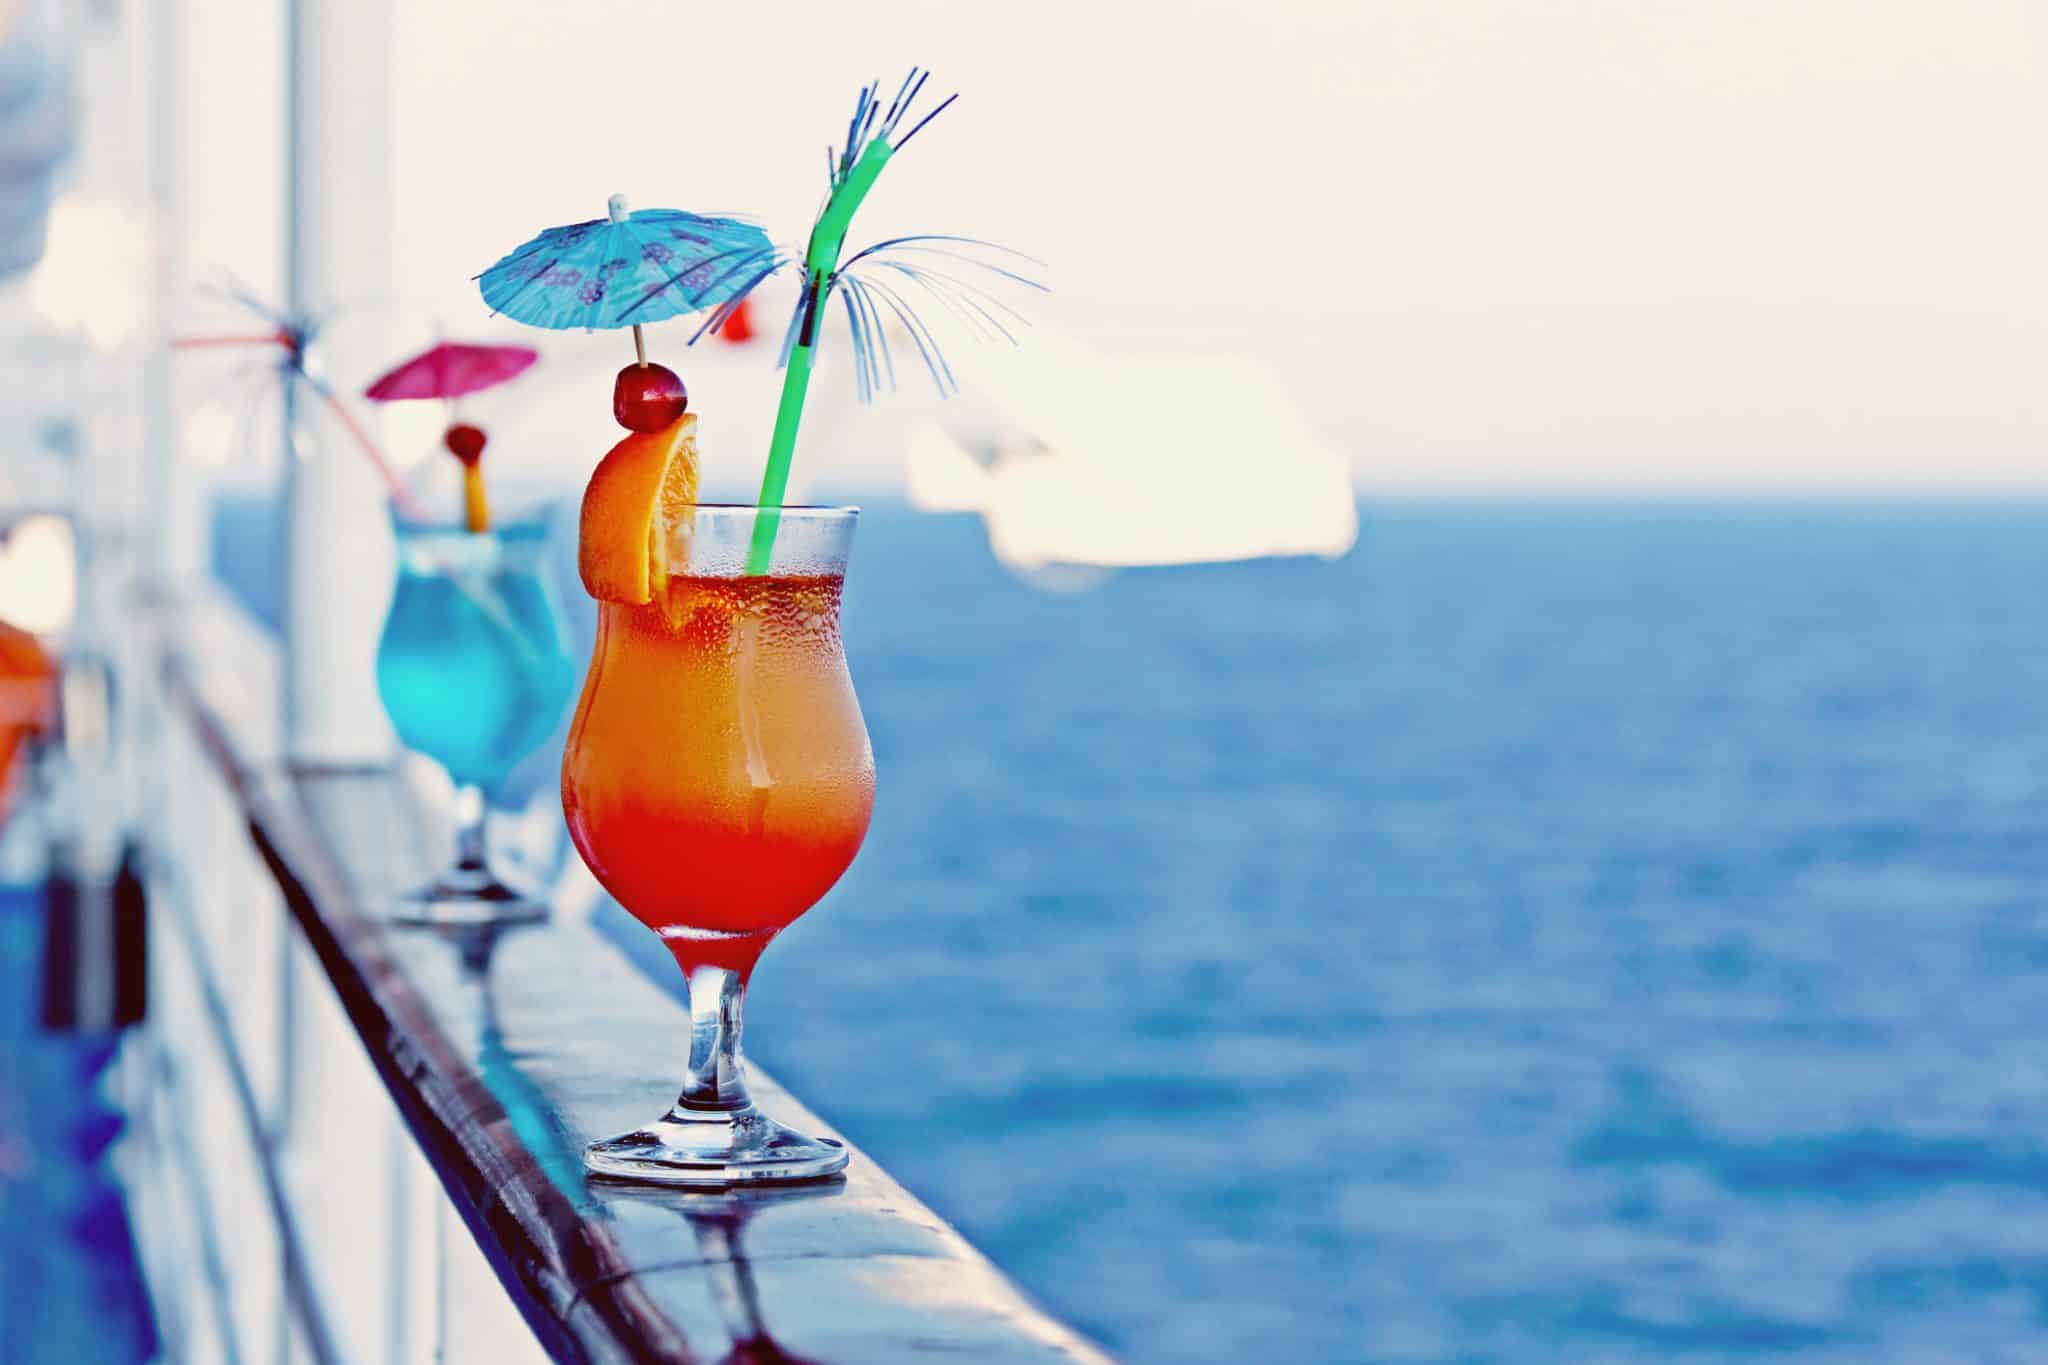 Drinks on the railing of a cruise ship